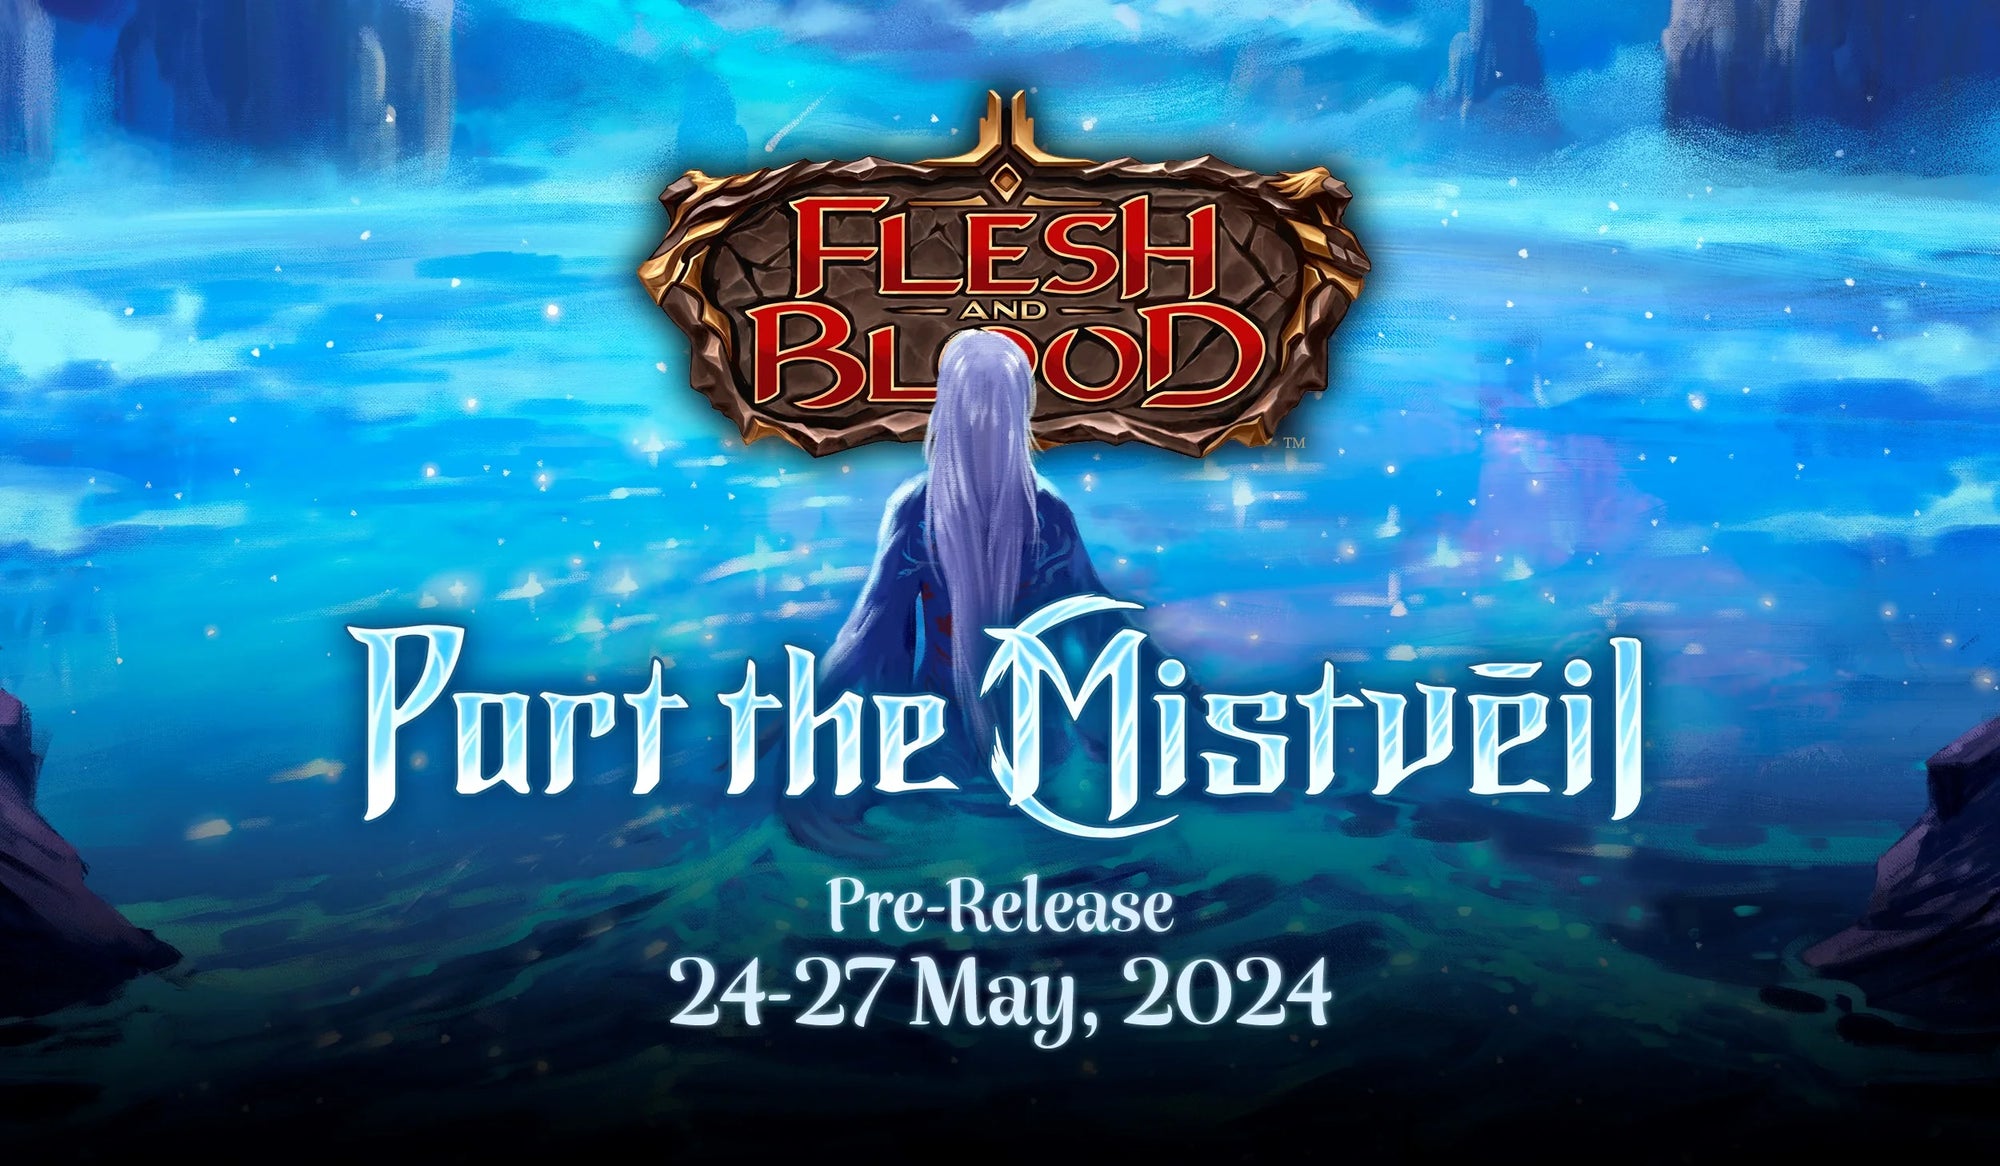 Flesh and Blood TCG - Part the Mistveil Pre-Release Entry